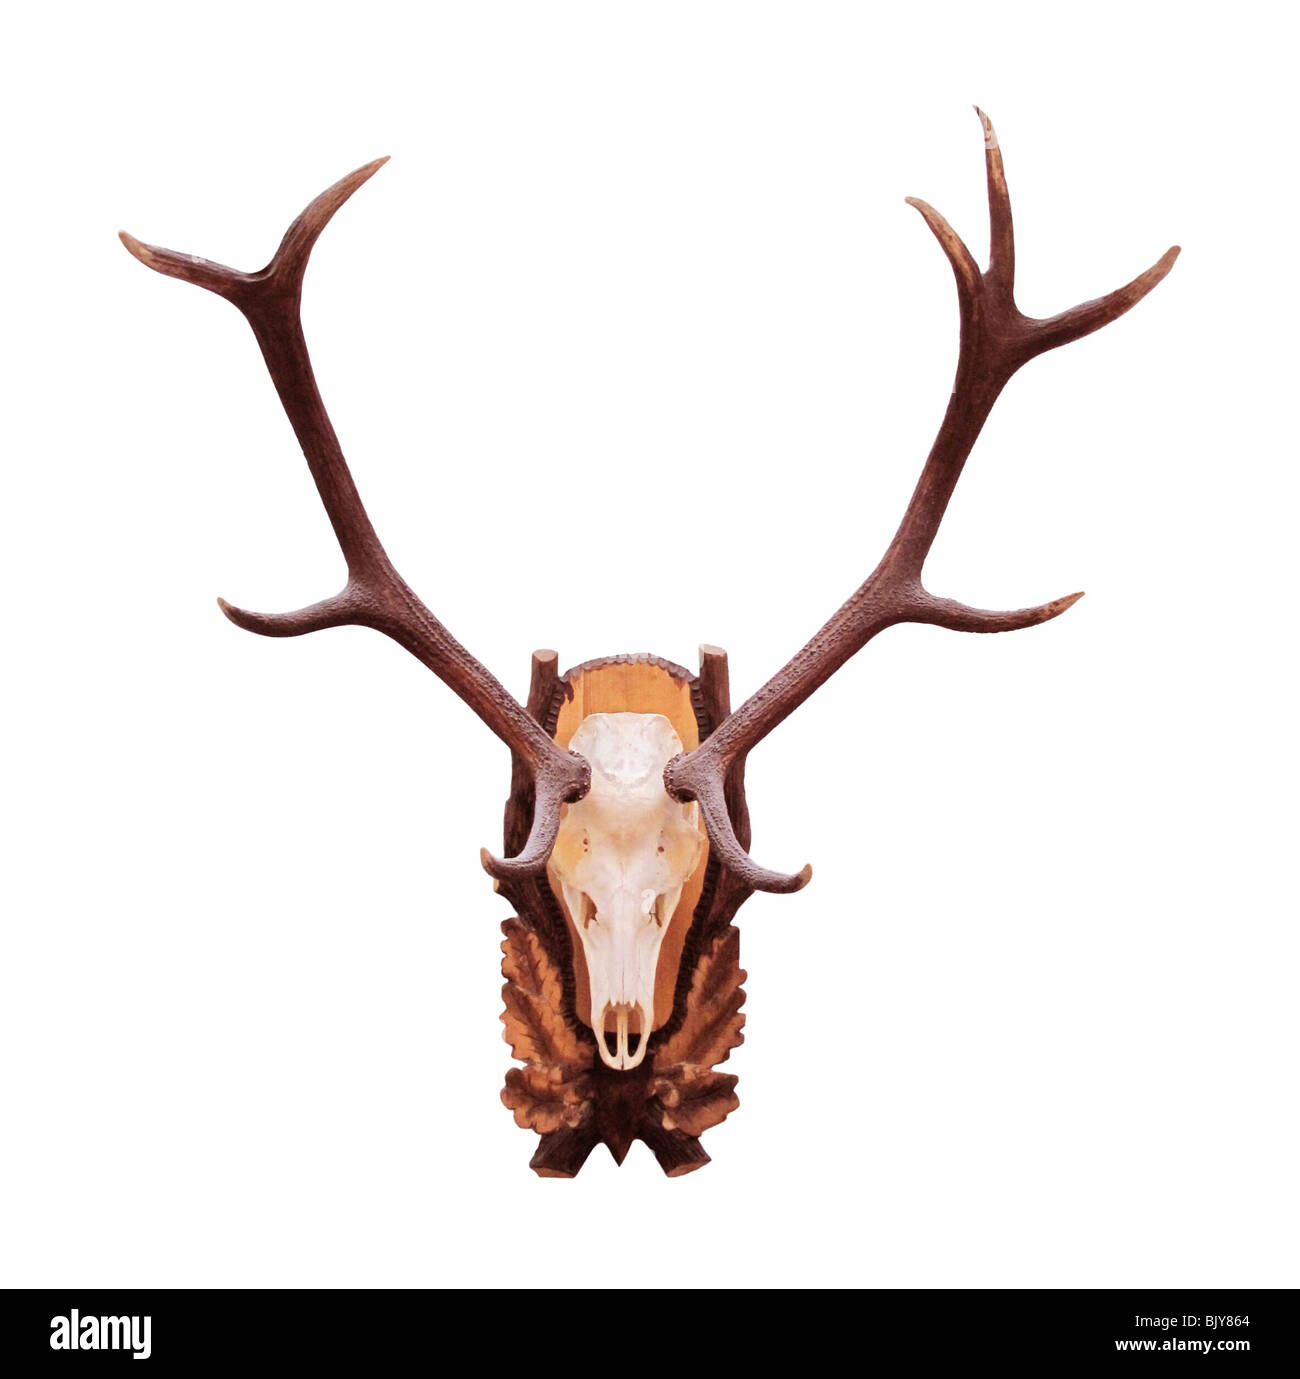 Deer antlers and skull isolated on white Stock Photo